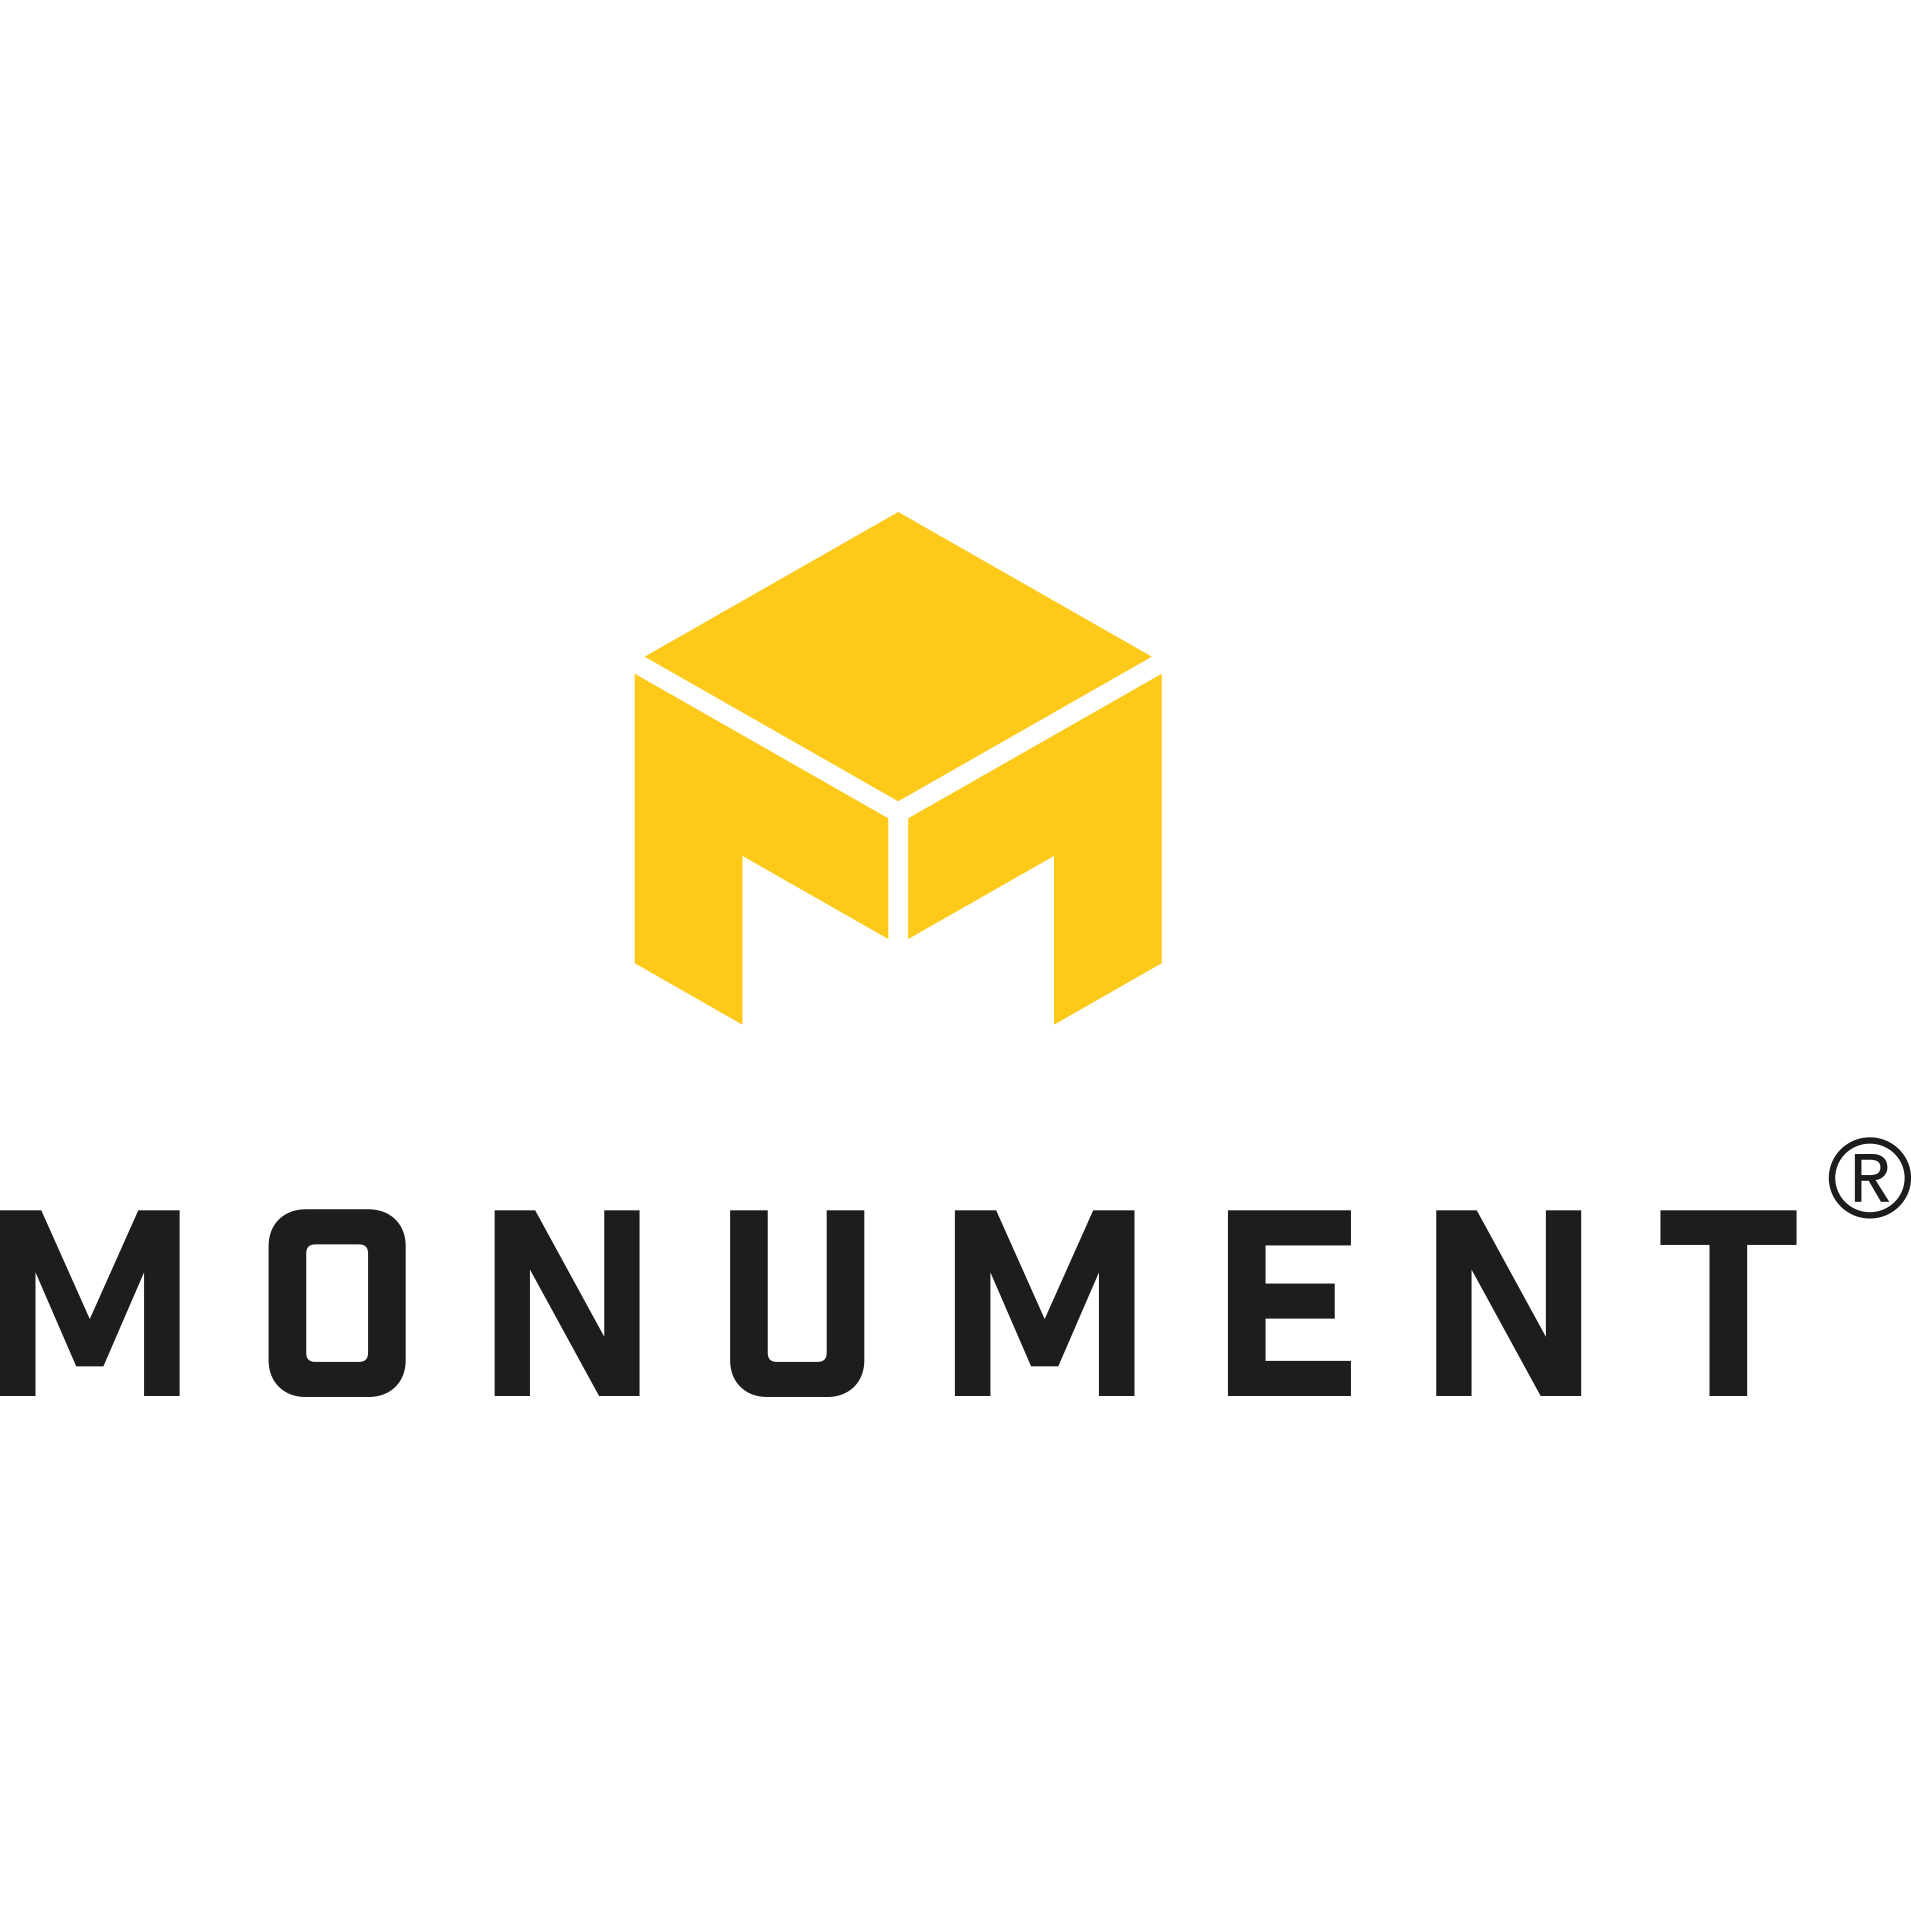 Monument Labs